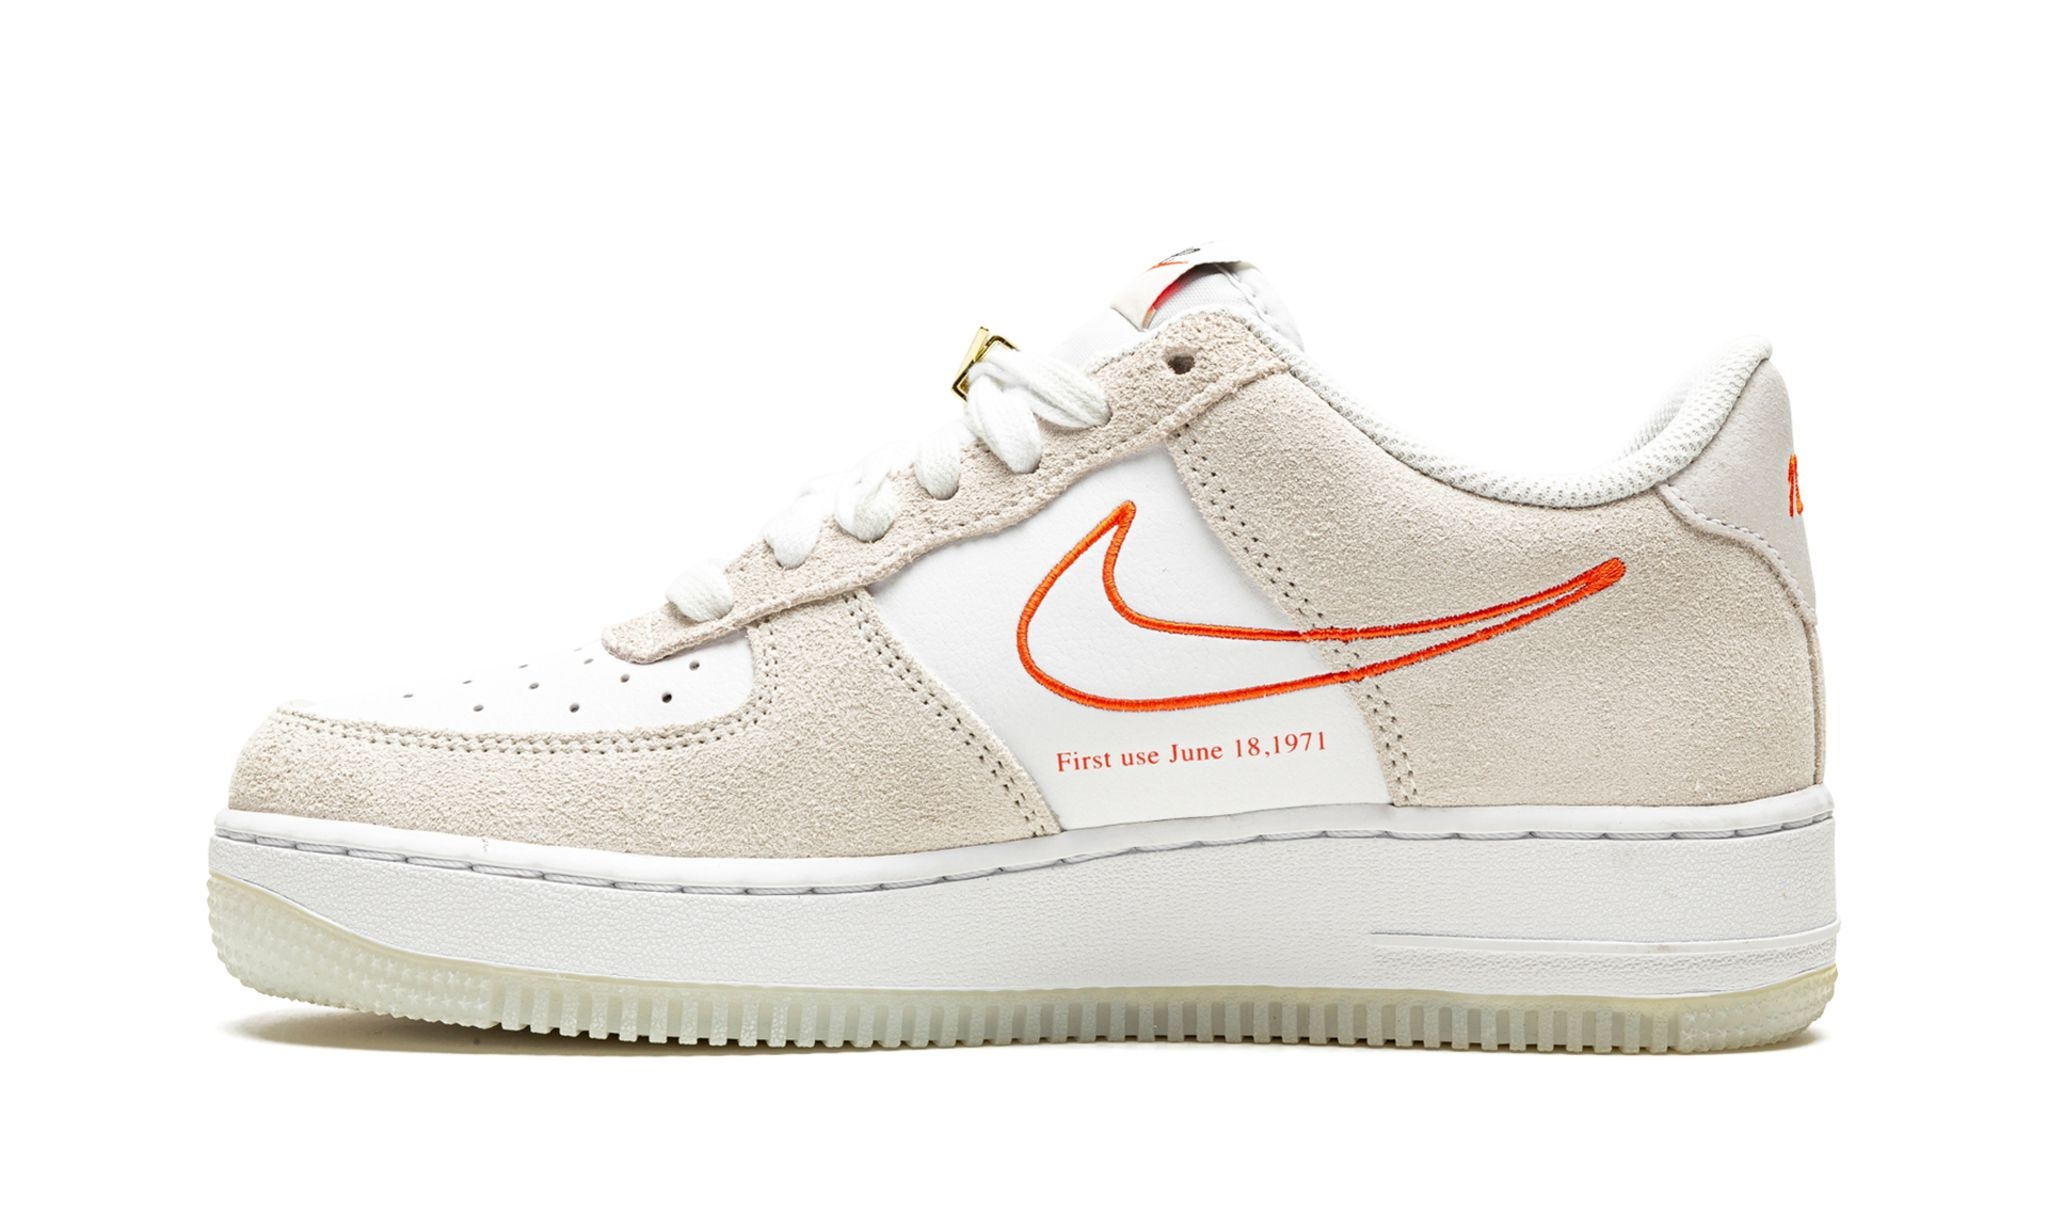 Wmns Air Force 1 '07 SE "First Use" - 6